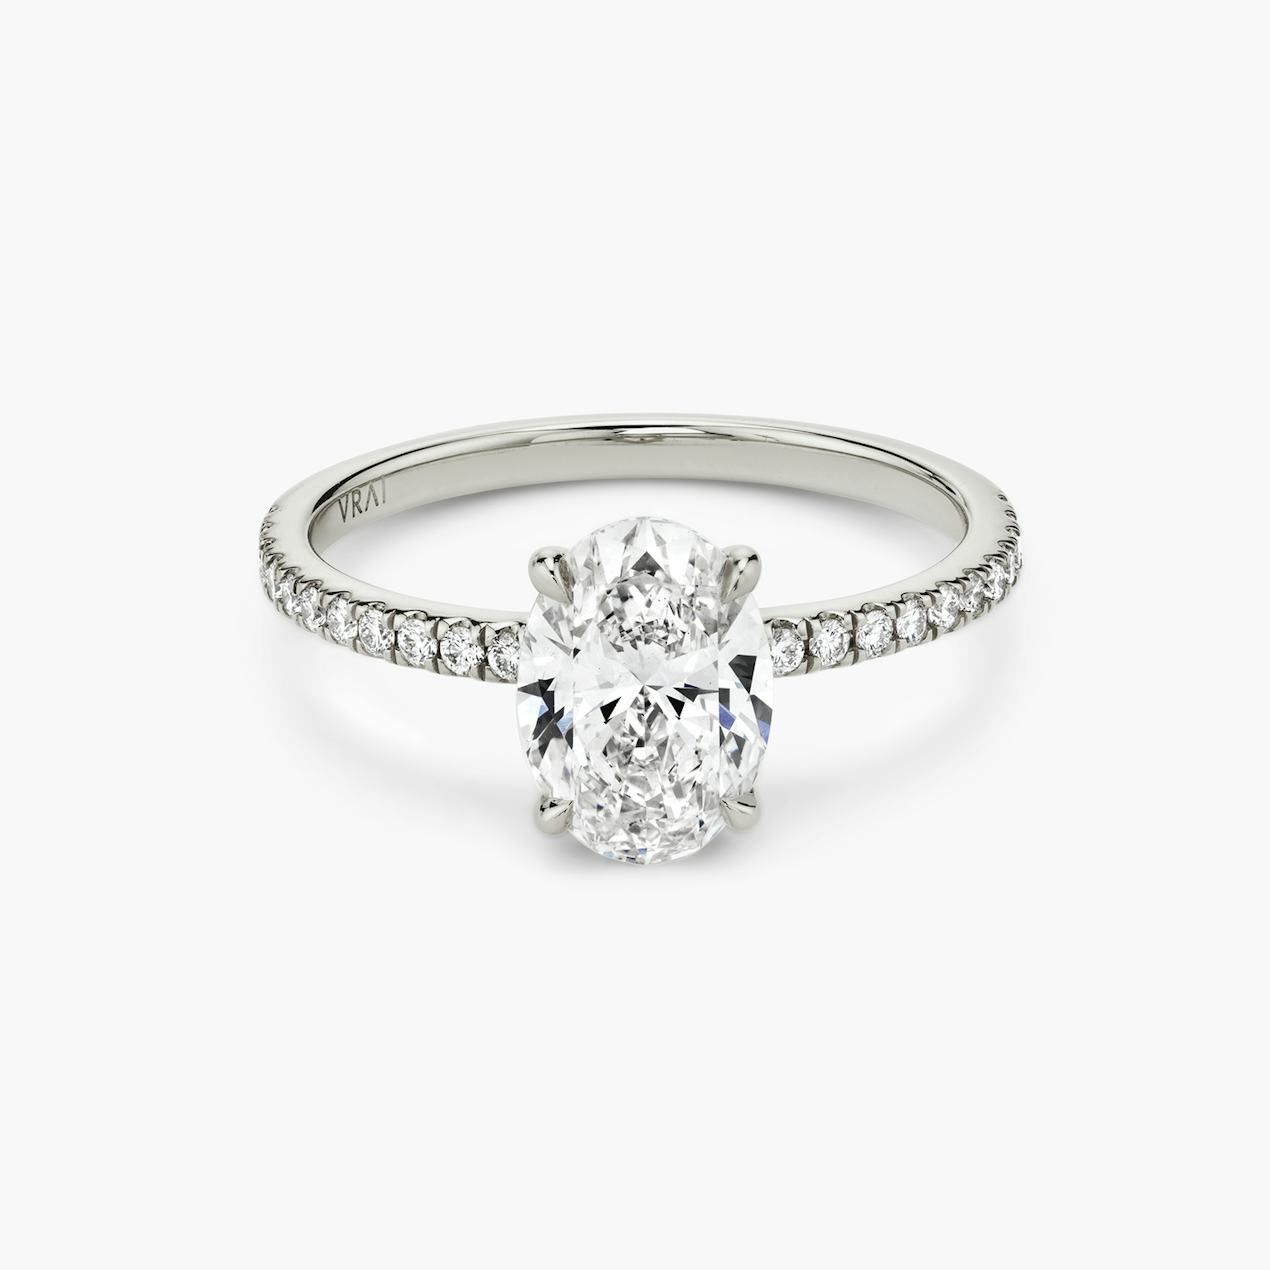 How To Perfectly Pair Your Solitaire Engagement Ring With A Wedding Band